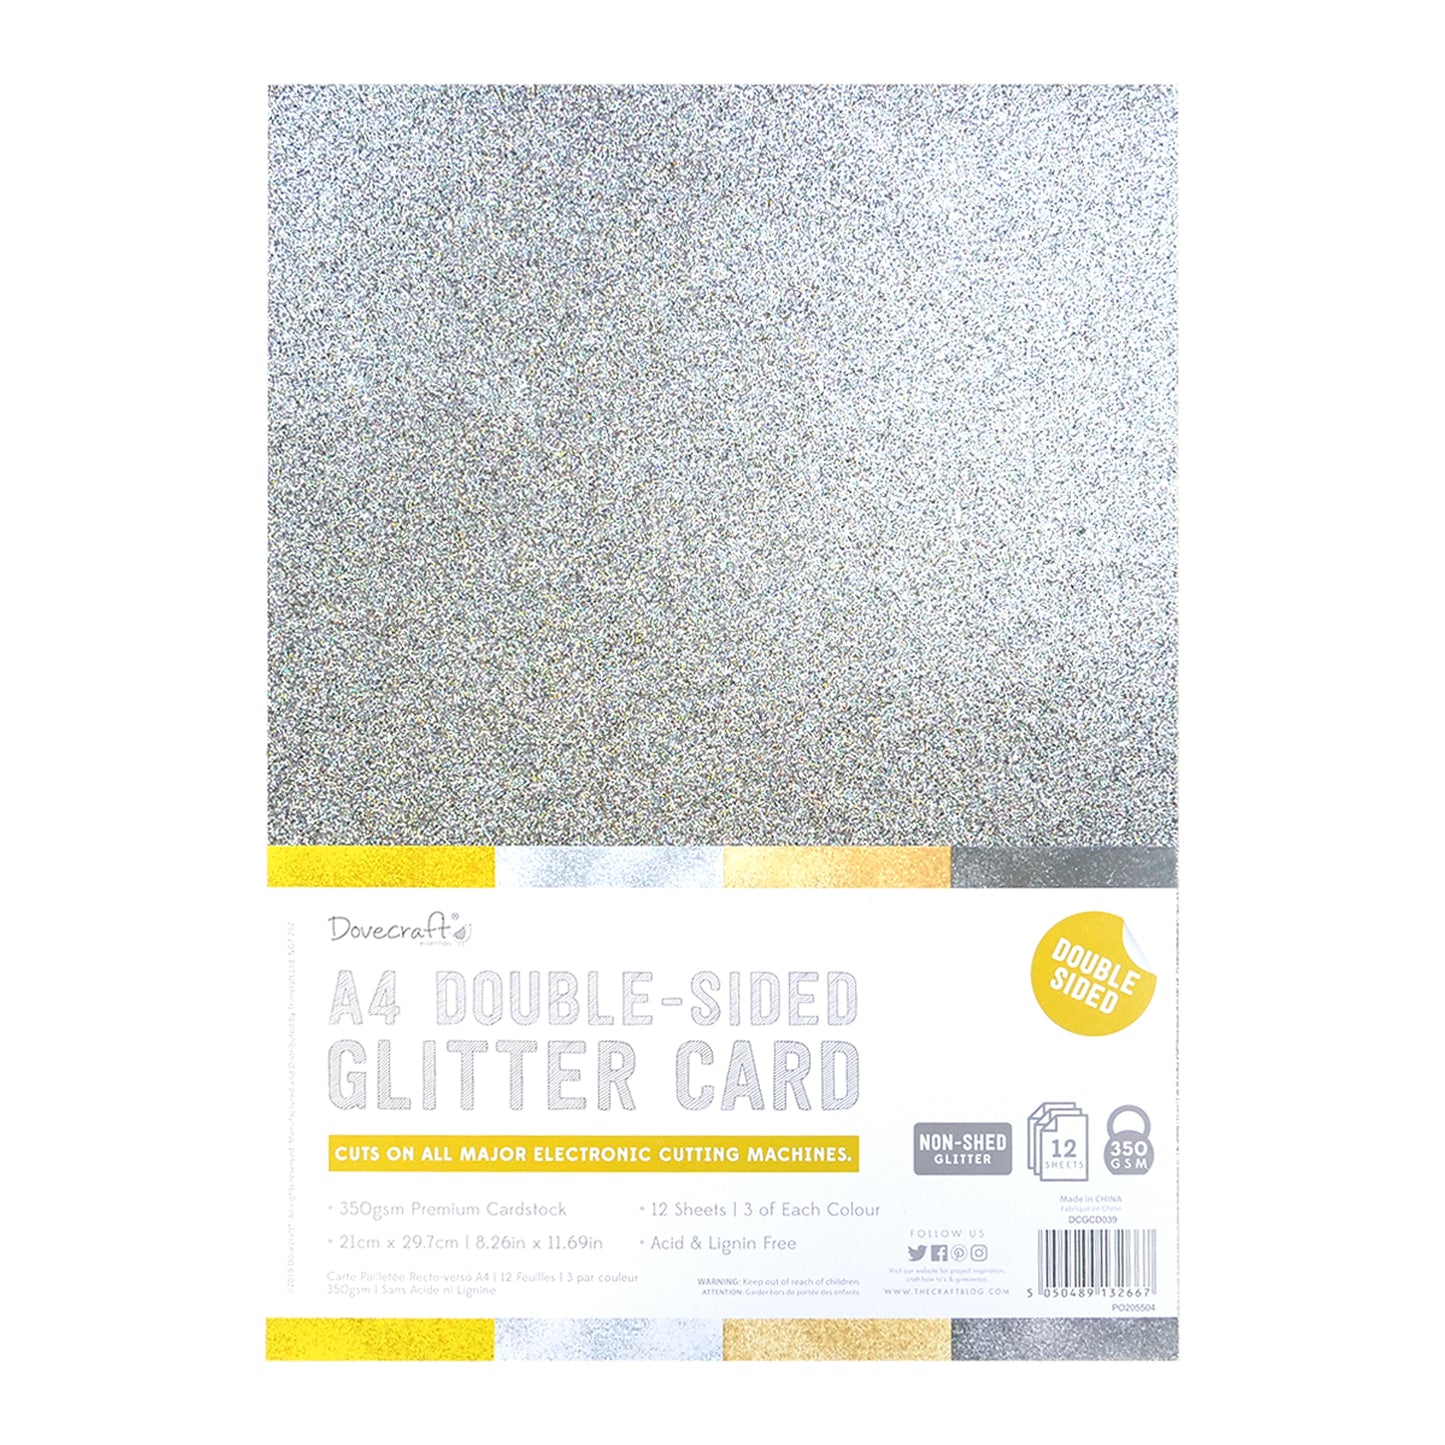 A4 Double Sided Glitter Card - Metallics Rose Gold Silver Gunmetal Gold  - 350gsm 12 Sheets - SweetpeaStore